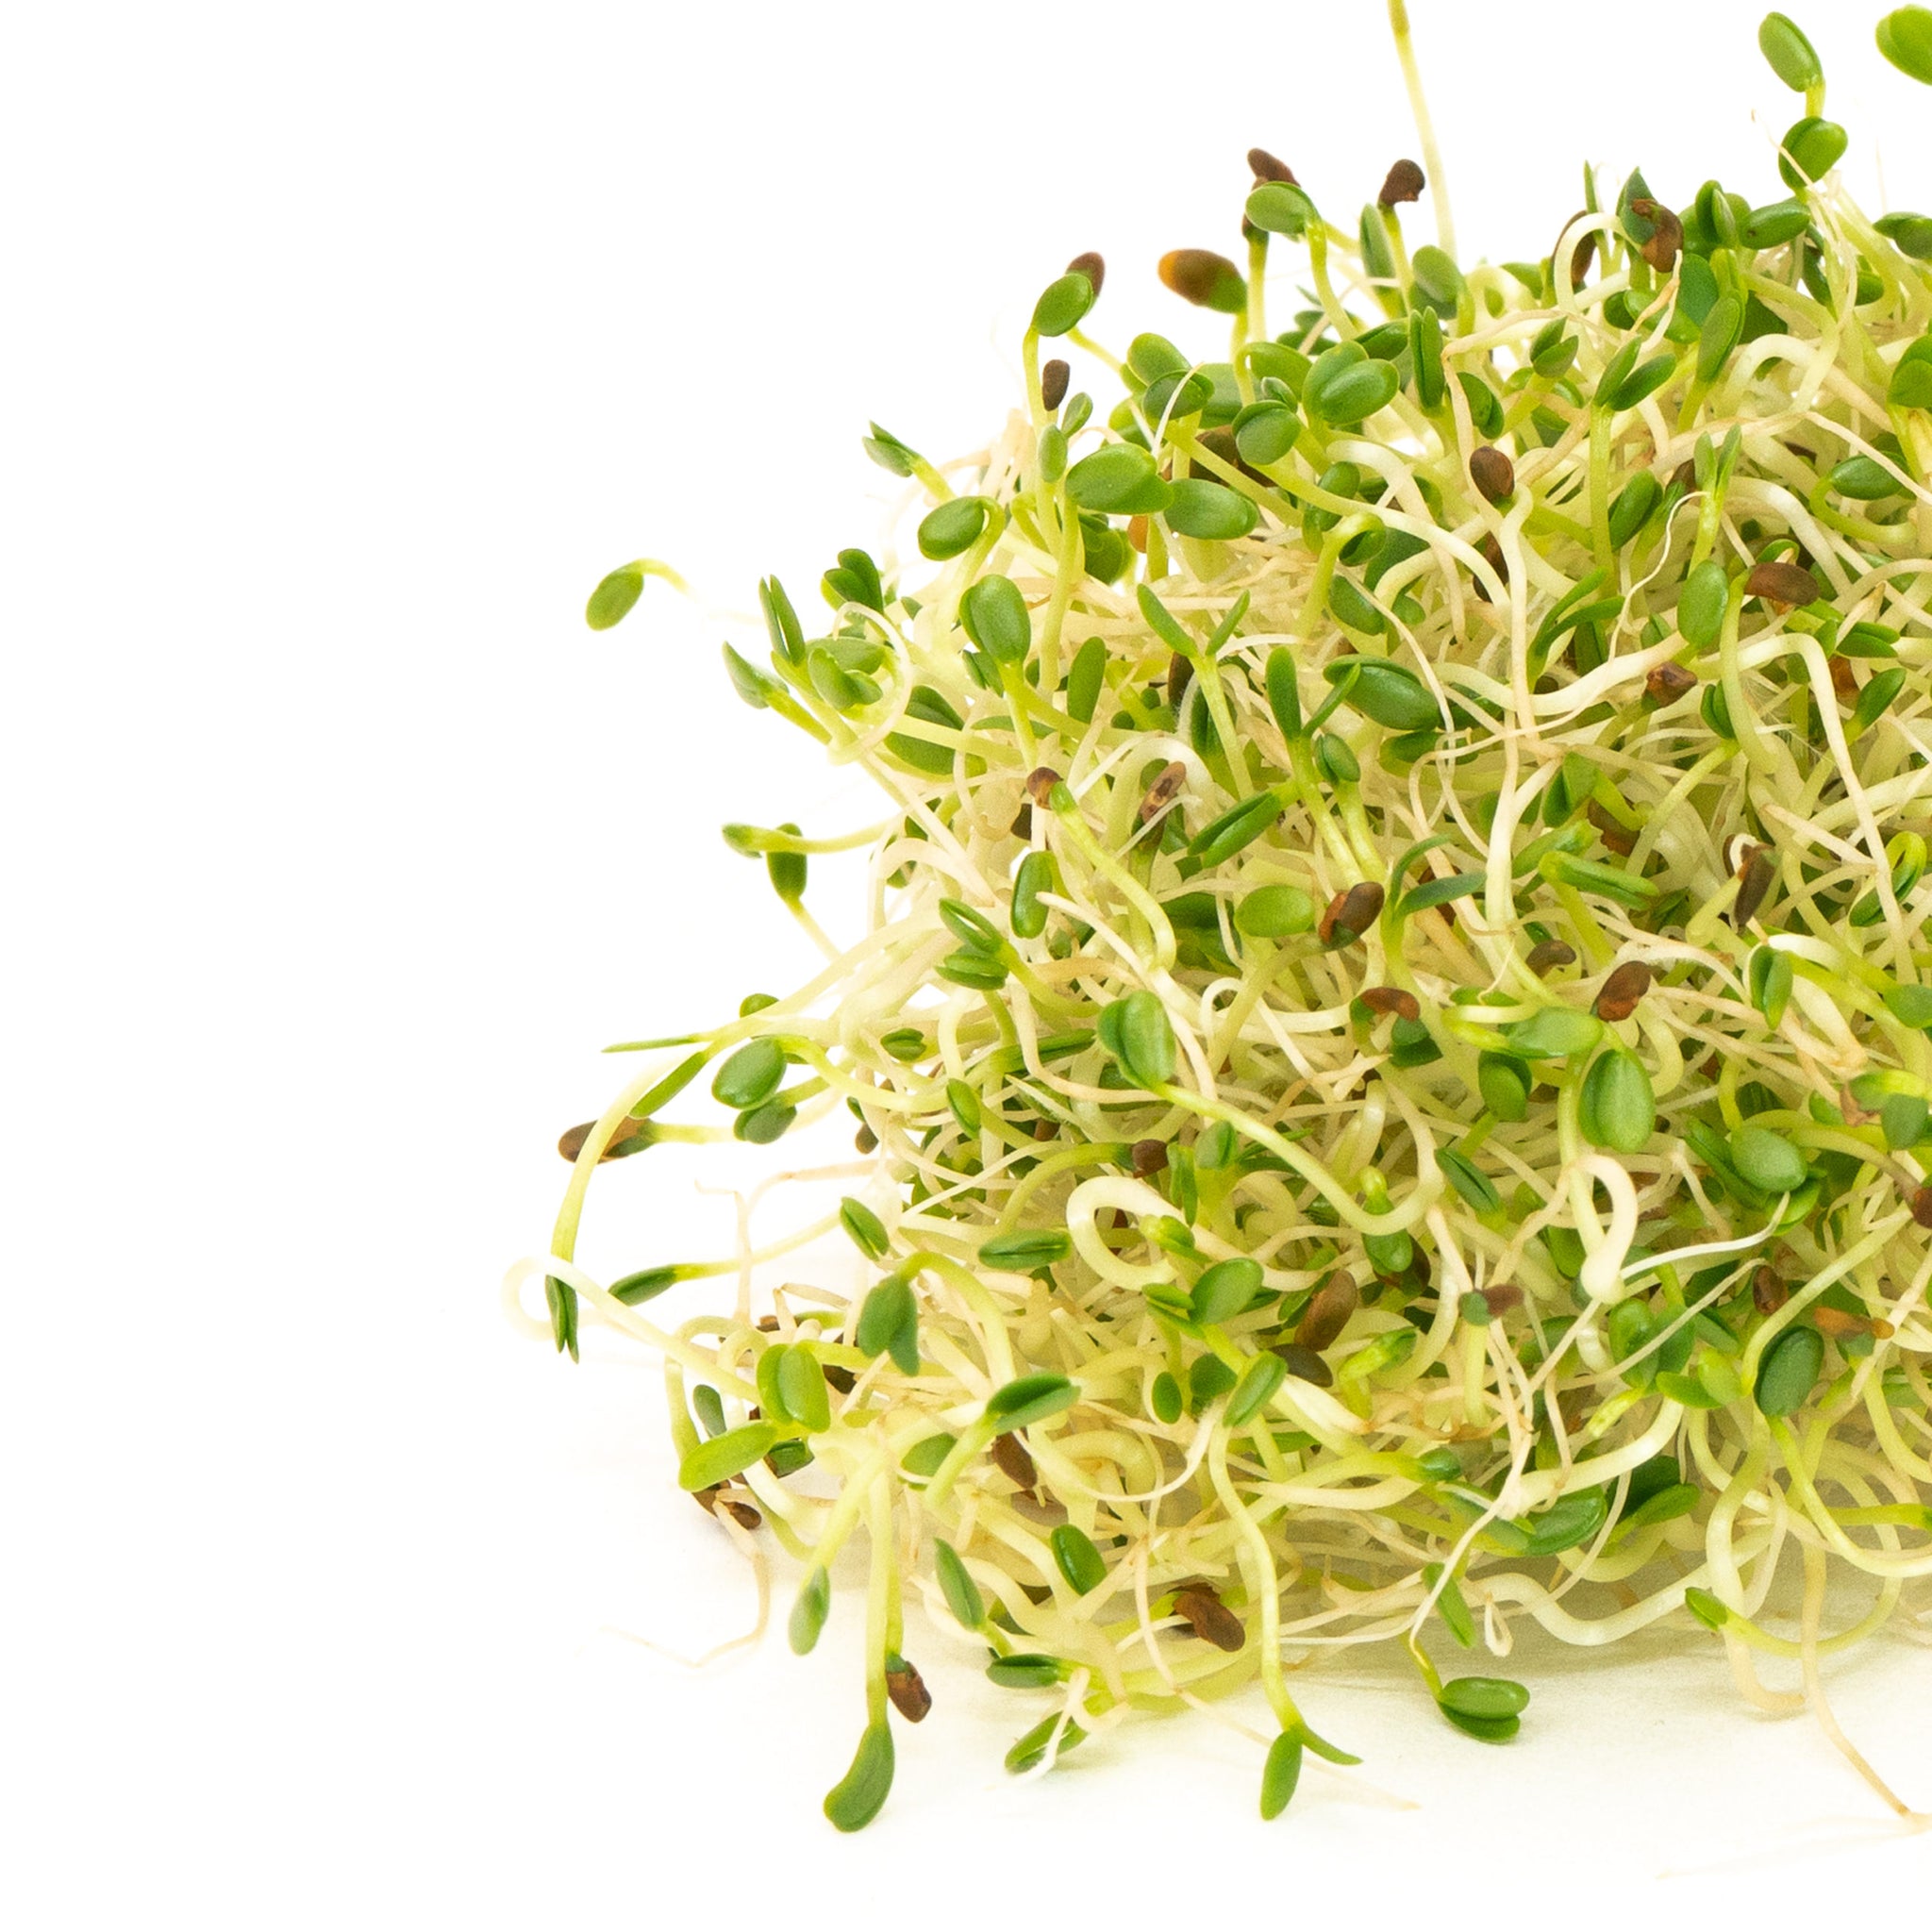 Mumm's Organic Sprouting Seeds - Organic Sprouting Sandwich Booster 125g